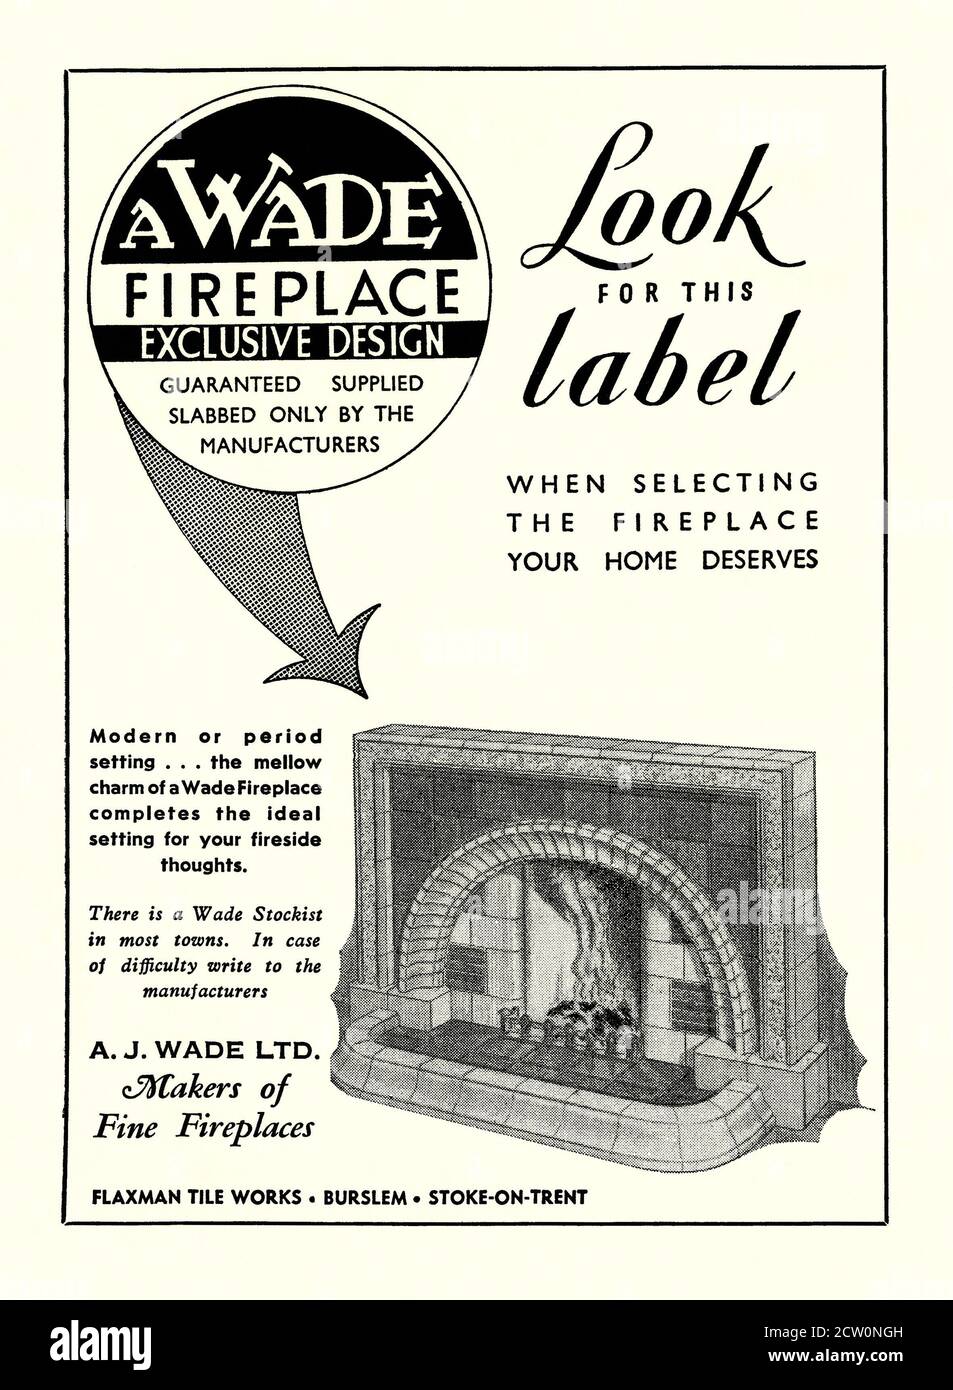 A 1951 magazine advert for a tiled fireplace from A Wade of Burslem, Stoke on Trent, Staffordshire, England, UK. The illustration shows a typical post-war, ceramic fire surround. The Manchester Pottery and the neighbouring Flaxman Tile Works were known as the Greenhead Works, the centre of the Wade pottery empire. The whole area was known as ‘The Potteries’ – vintage 1950s graphics. Stock Photo